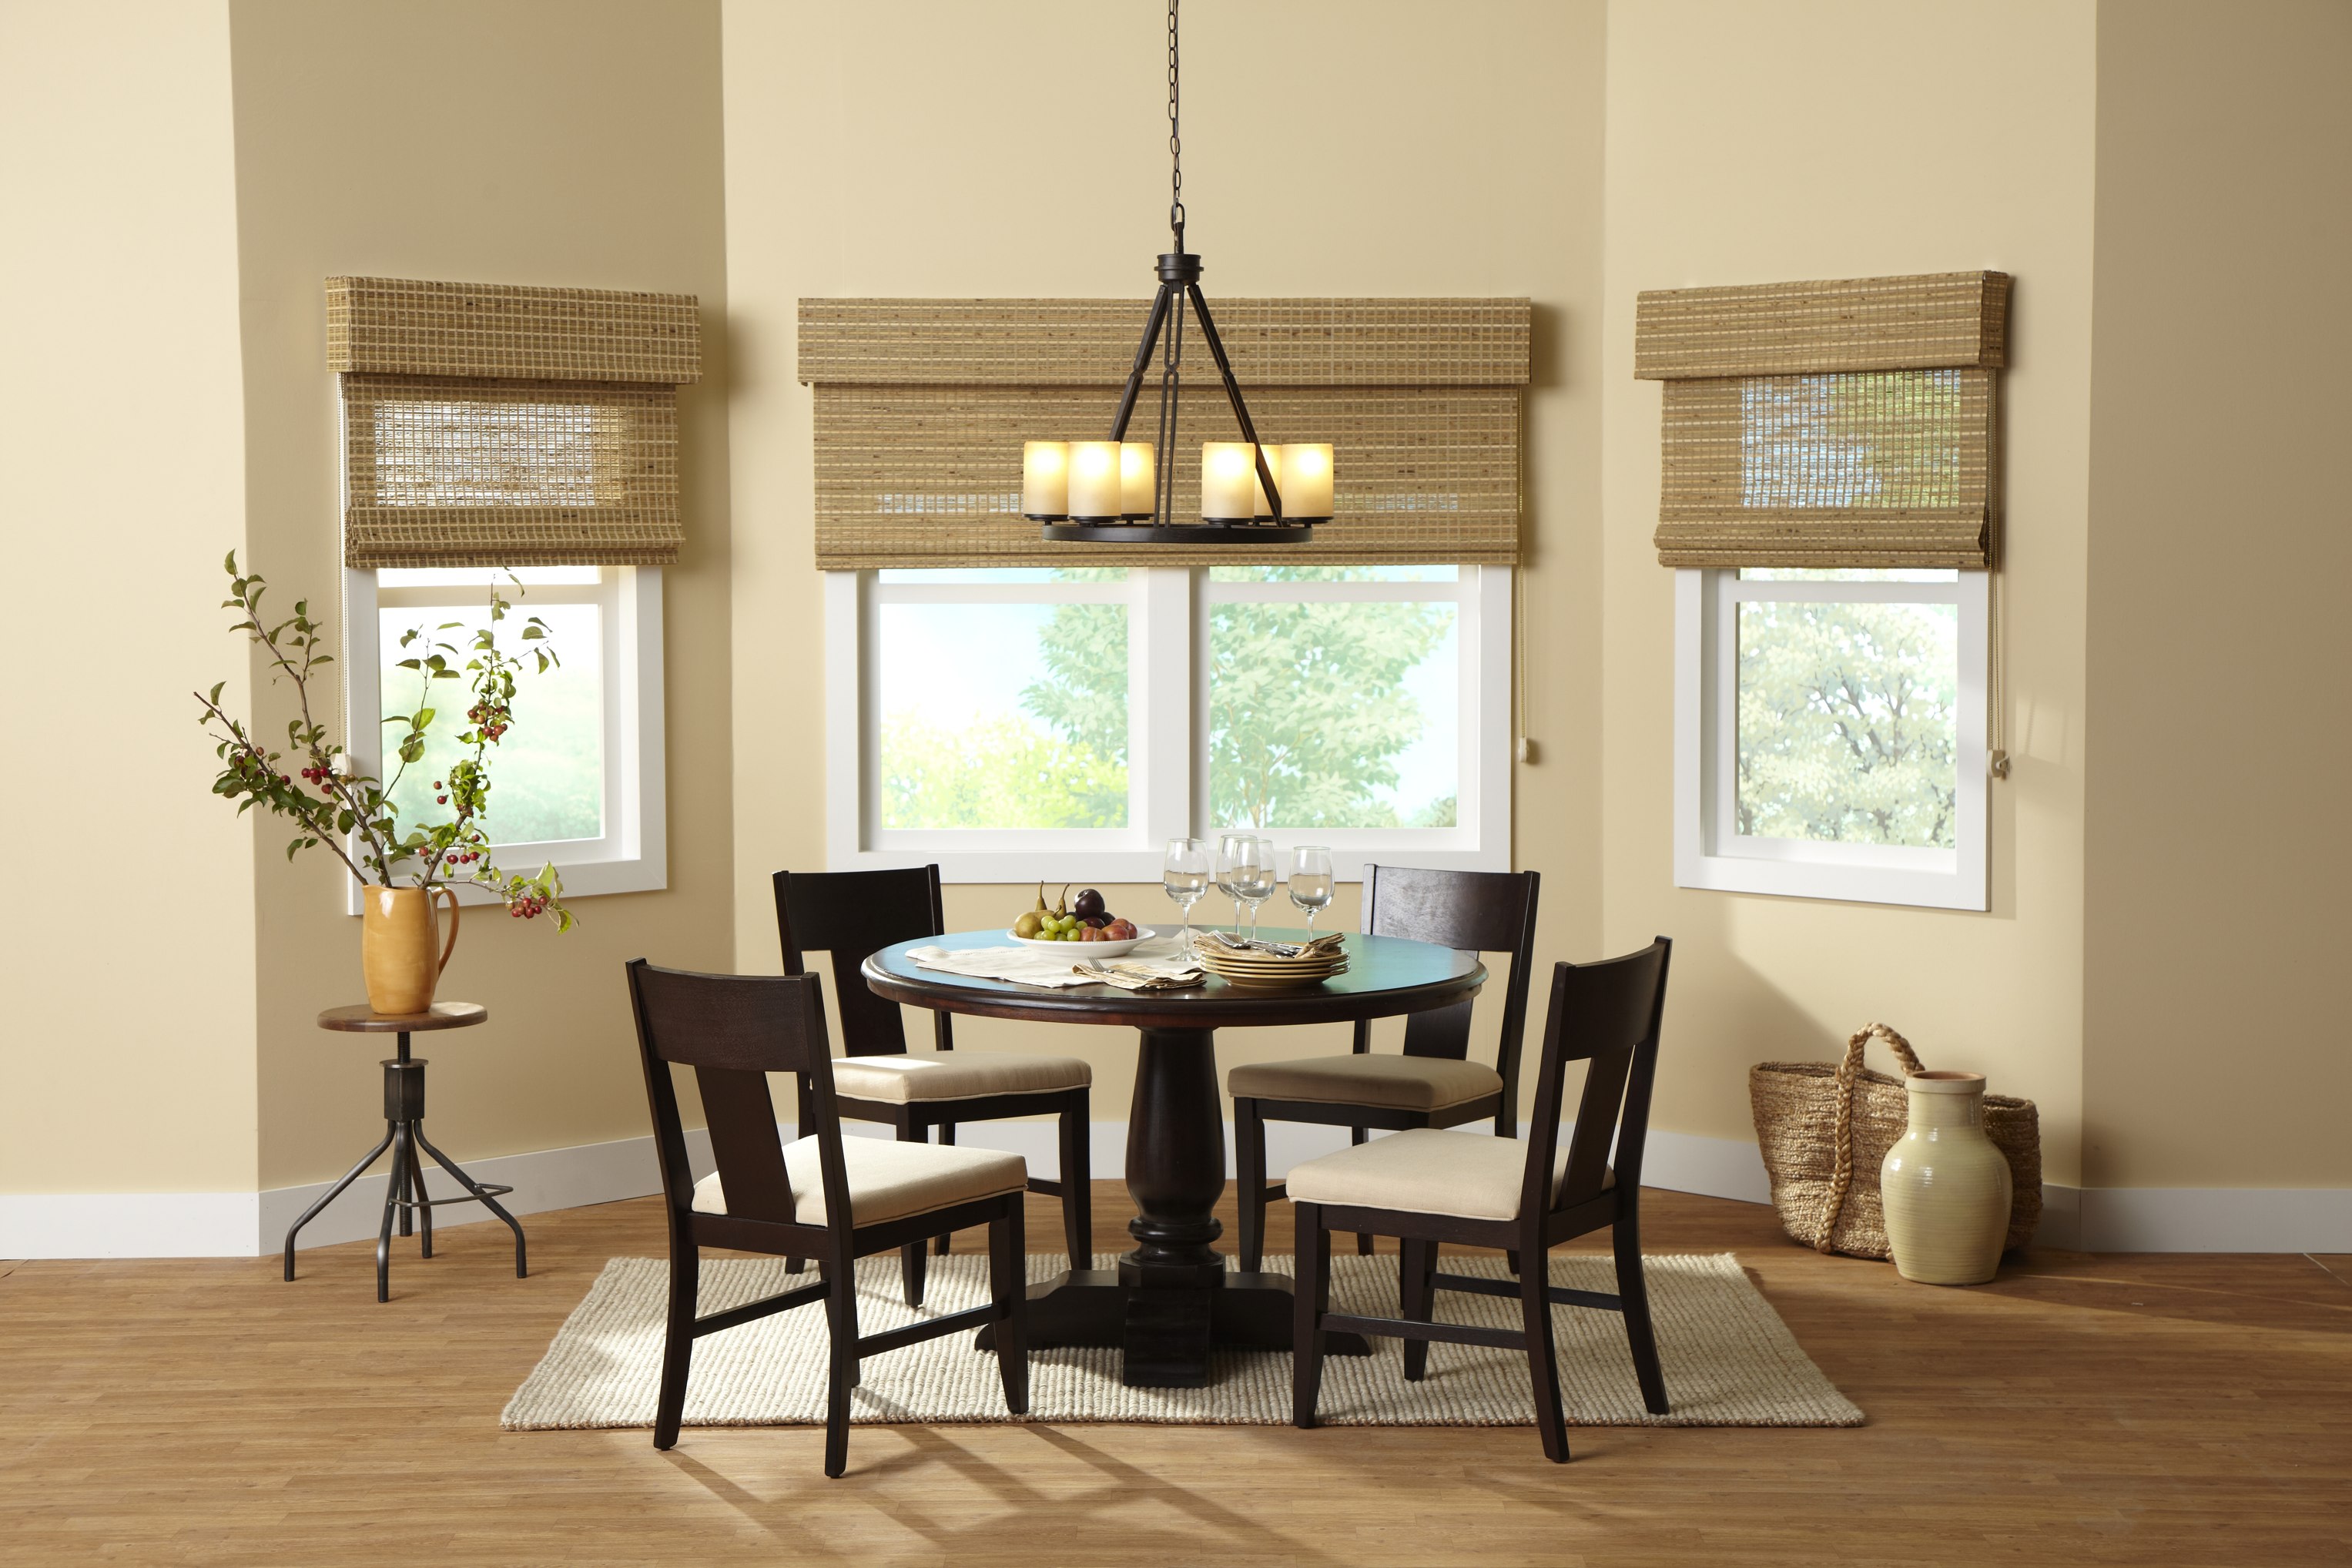 woven blinds in dining room